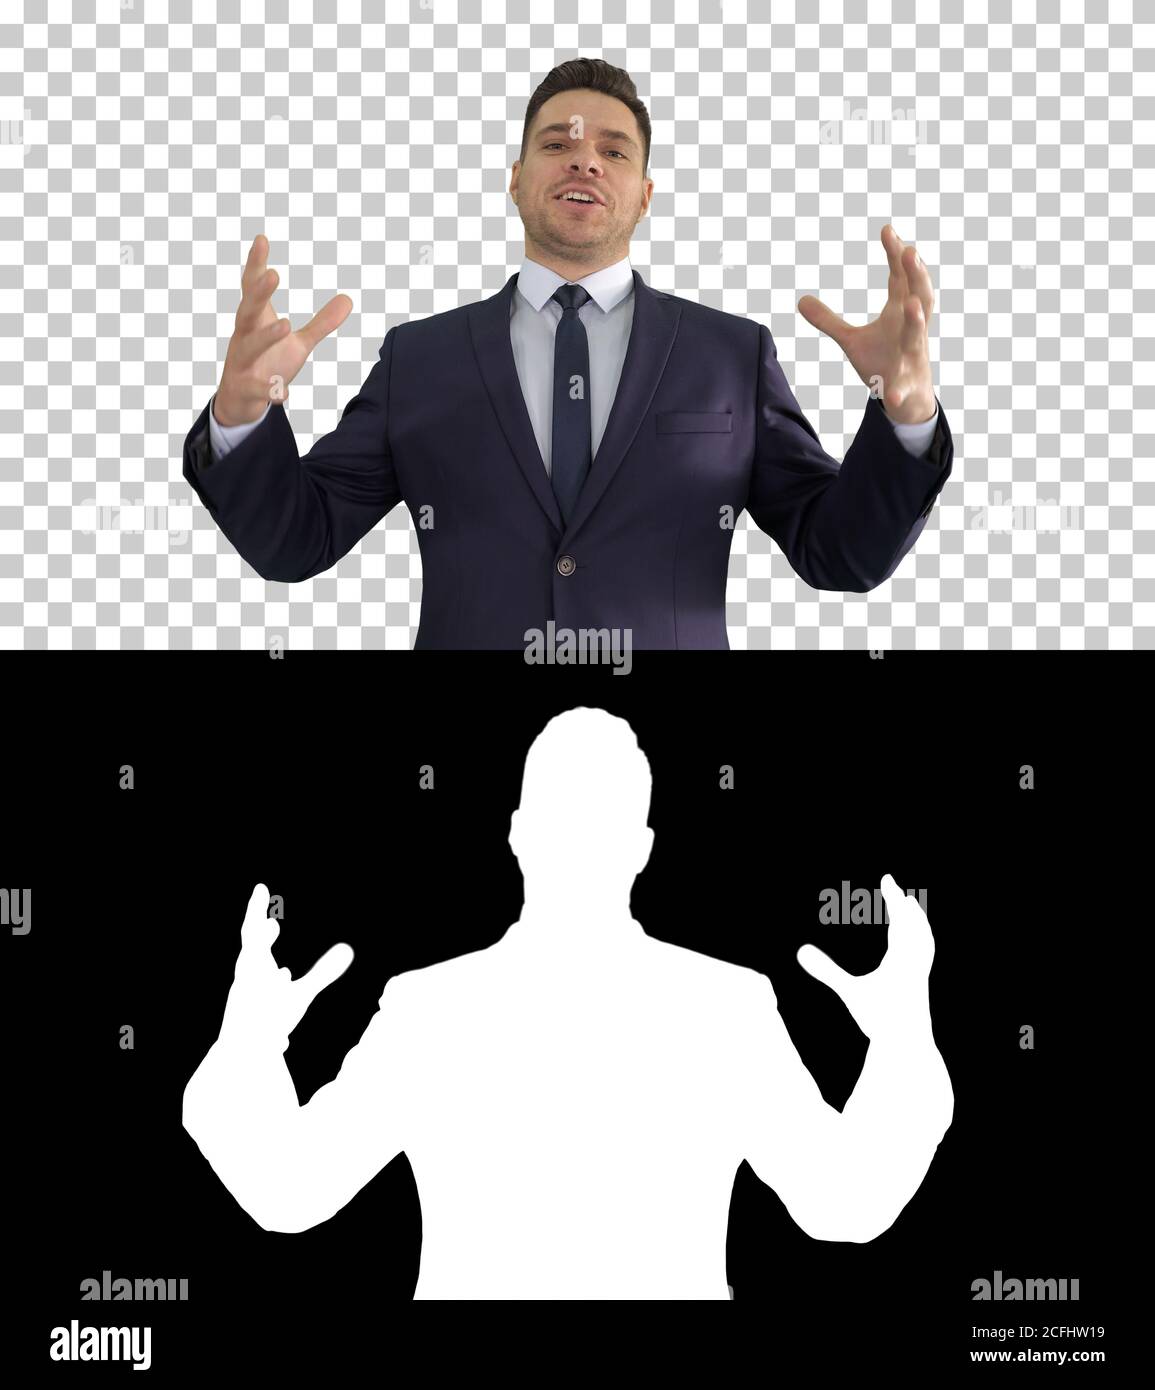 Man in formal clothes speaking to camera doing hand gestures in a very expressive and positive way, Alpha Channel Stock Photo